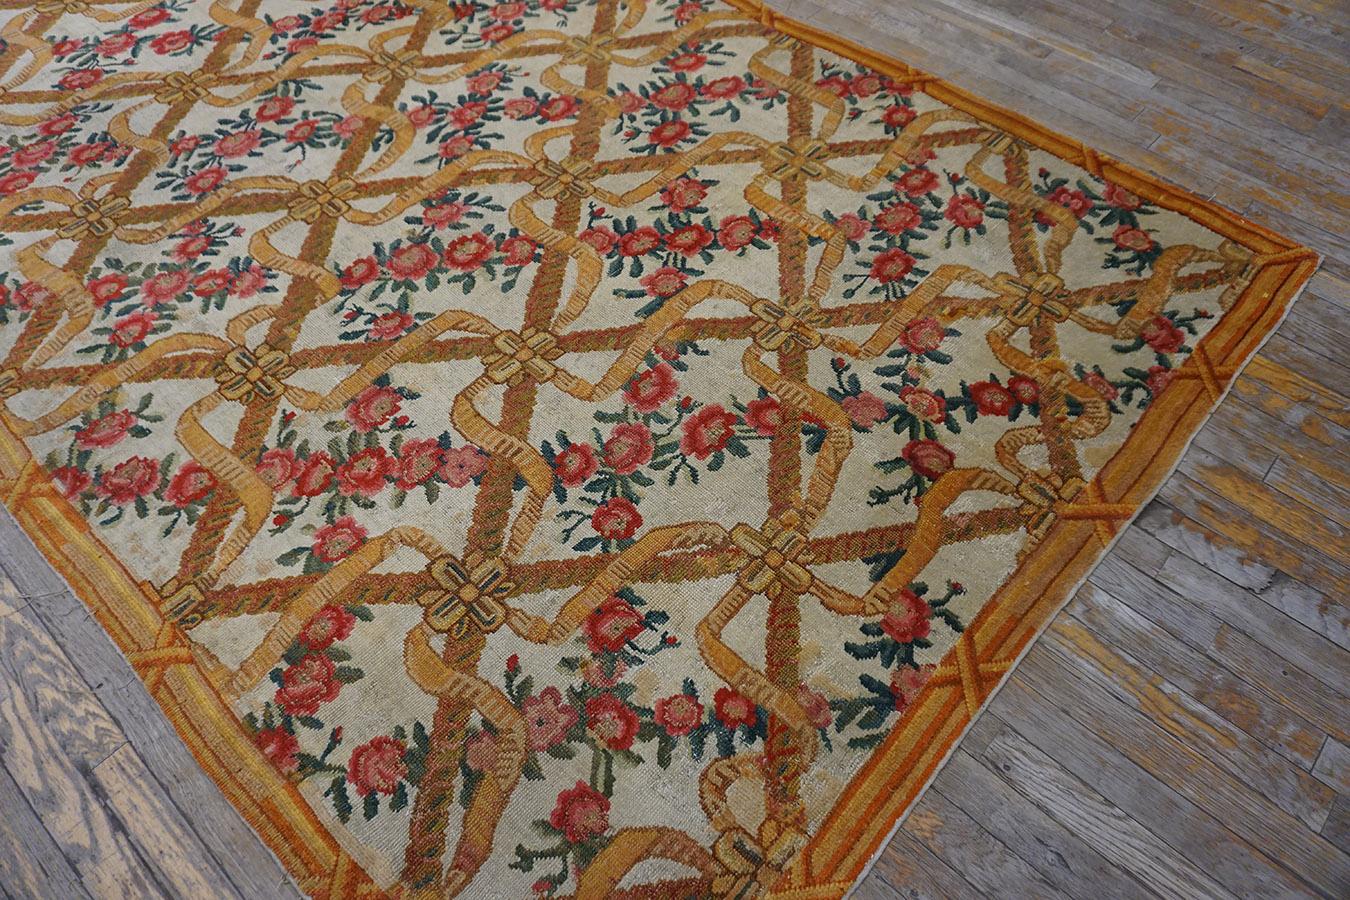 Hand-Woven 18th Century French Savonnerie Carpet ( 5'6